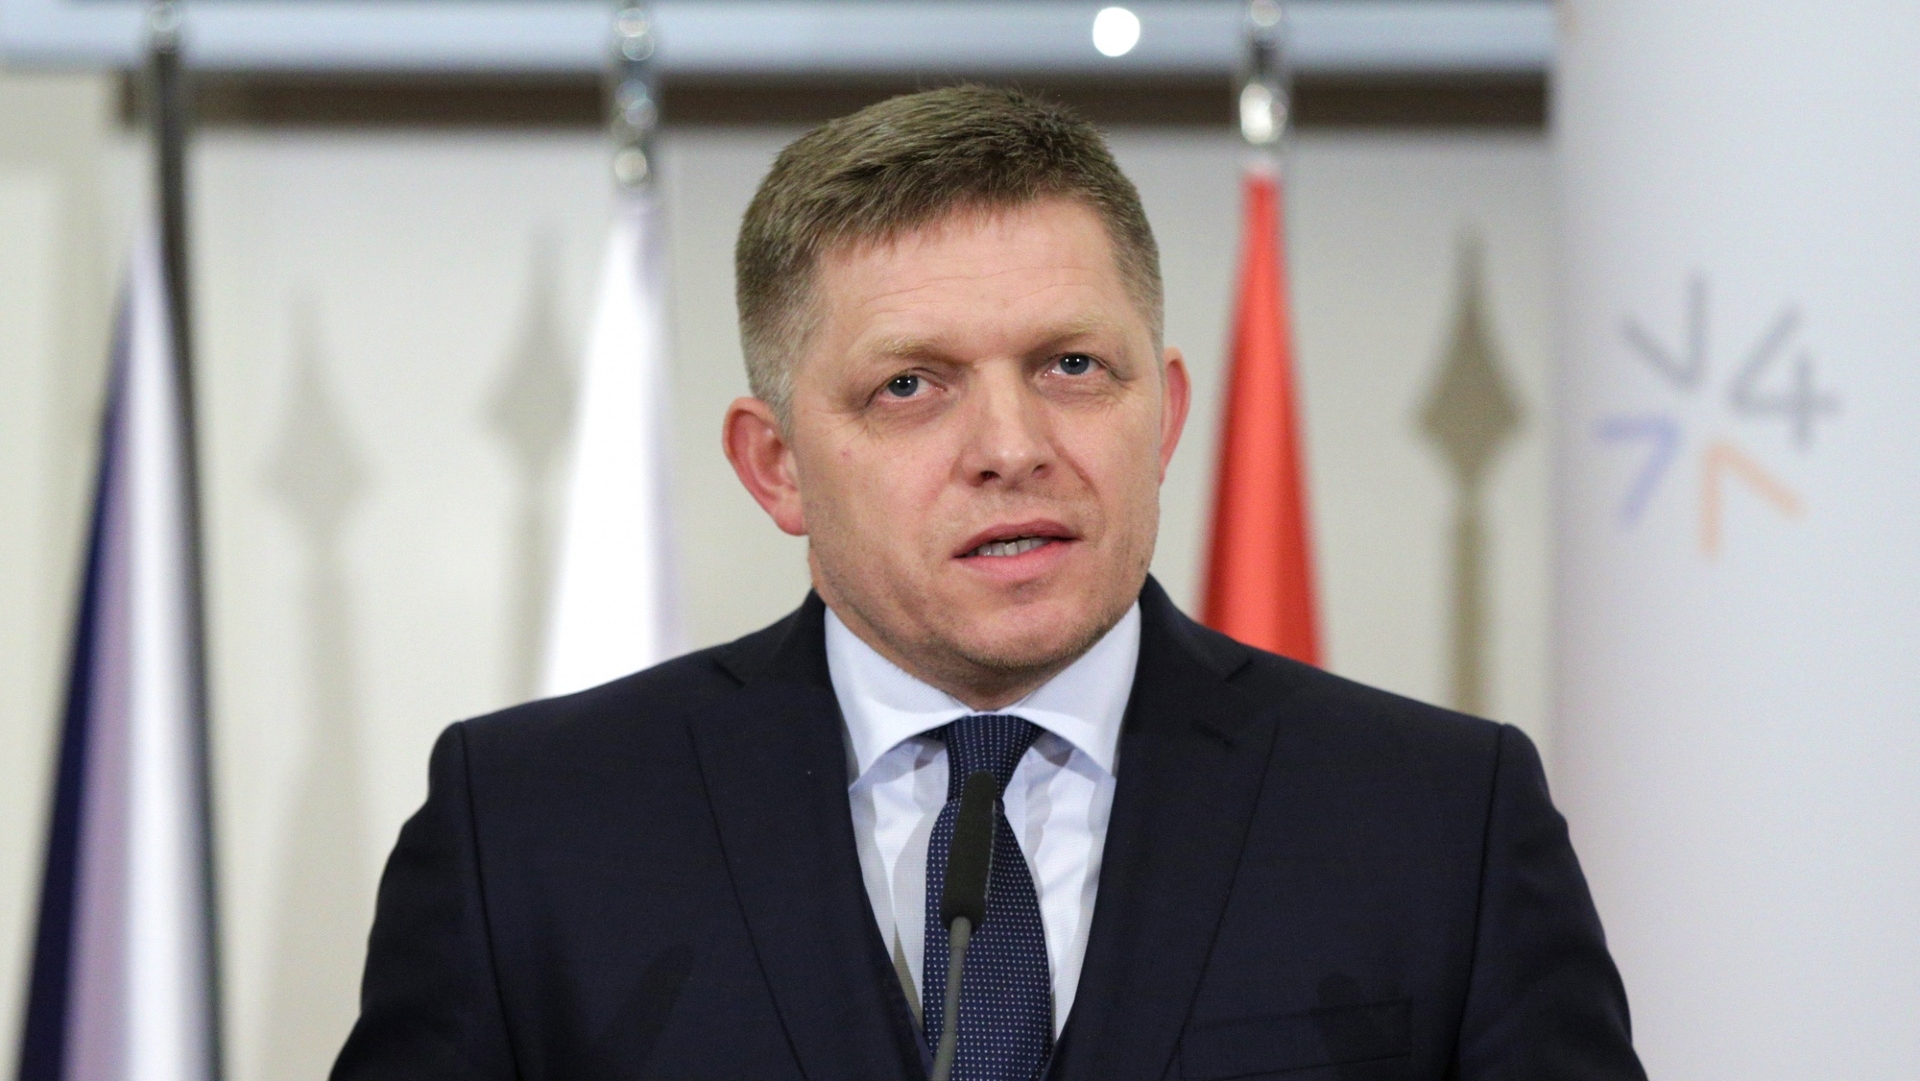 Smer led by Robert Fico dominates Slovak elections